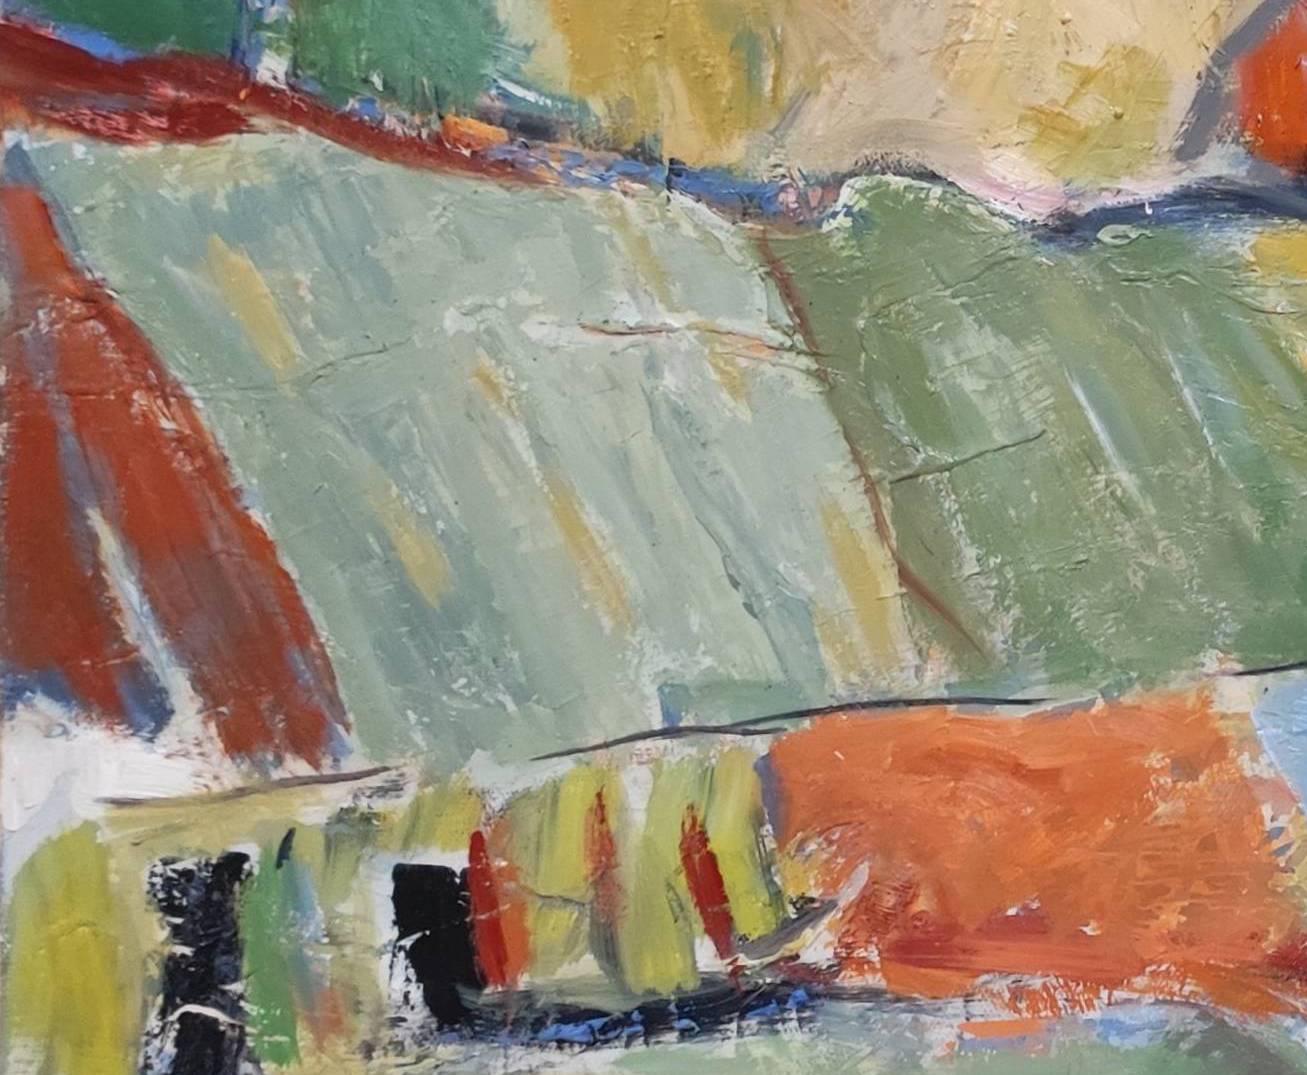 Abstract countryside landscape with colored plots worked in oil on linen canvas..
The construction takes precedence over the motif, the artist works on his composition until he finds the perfect balance.
the many layers superimposed with the palette